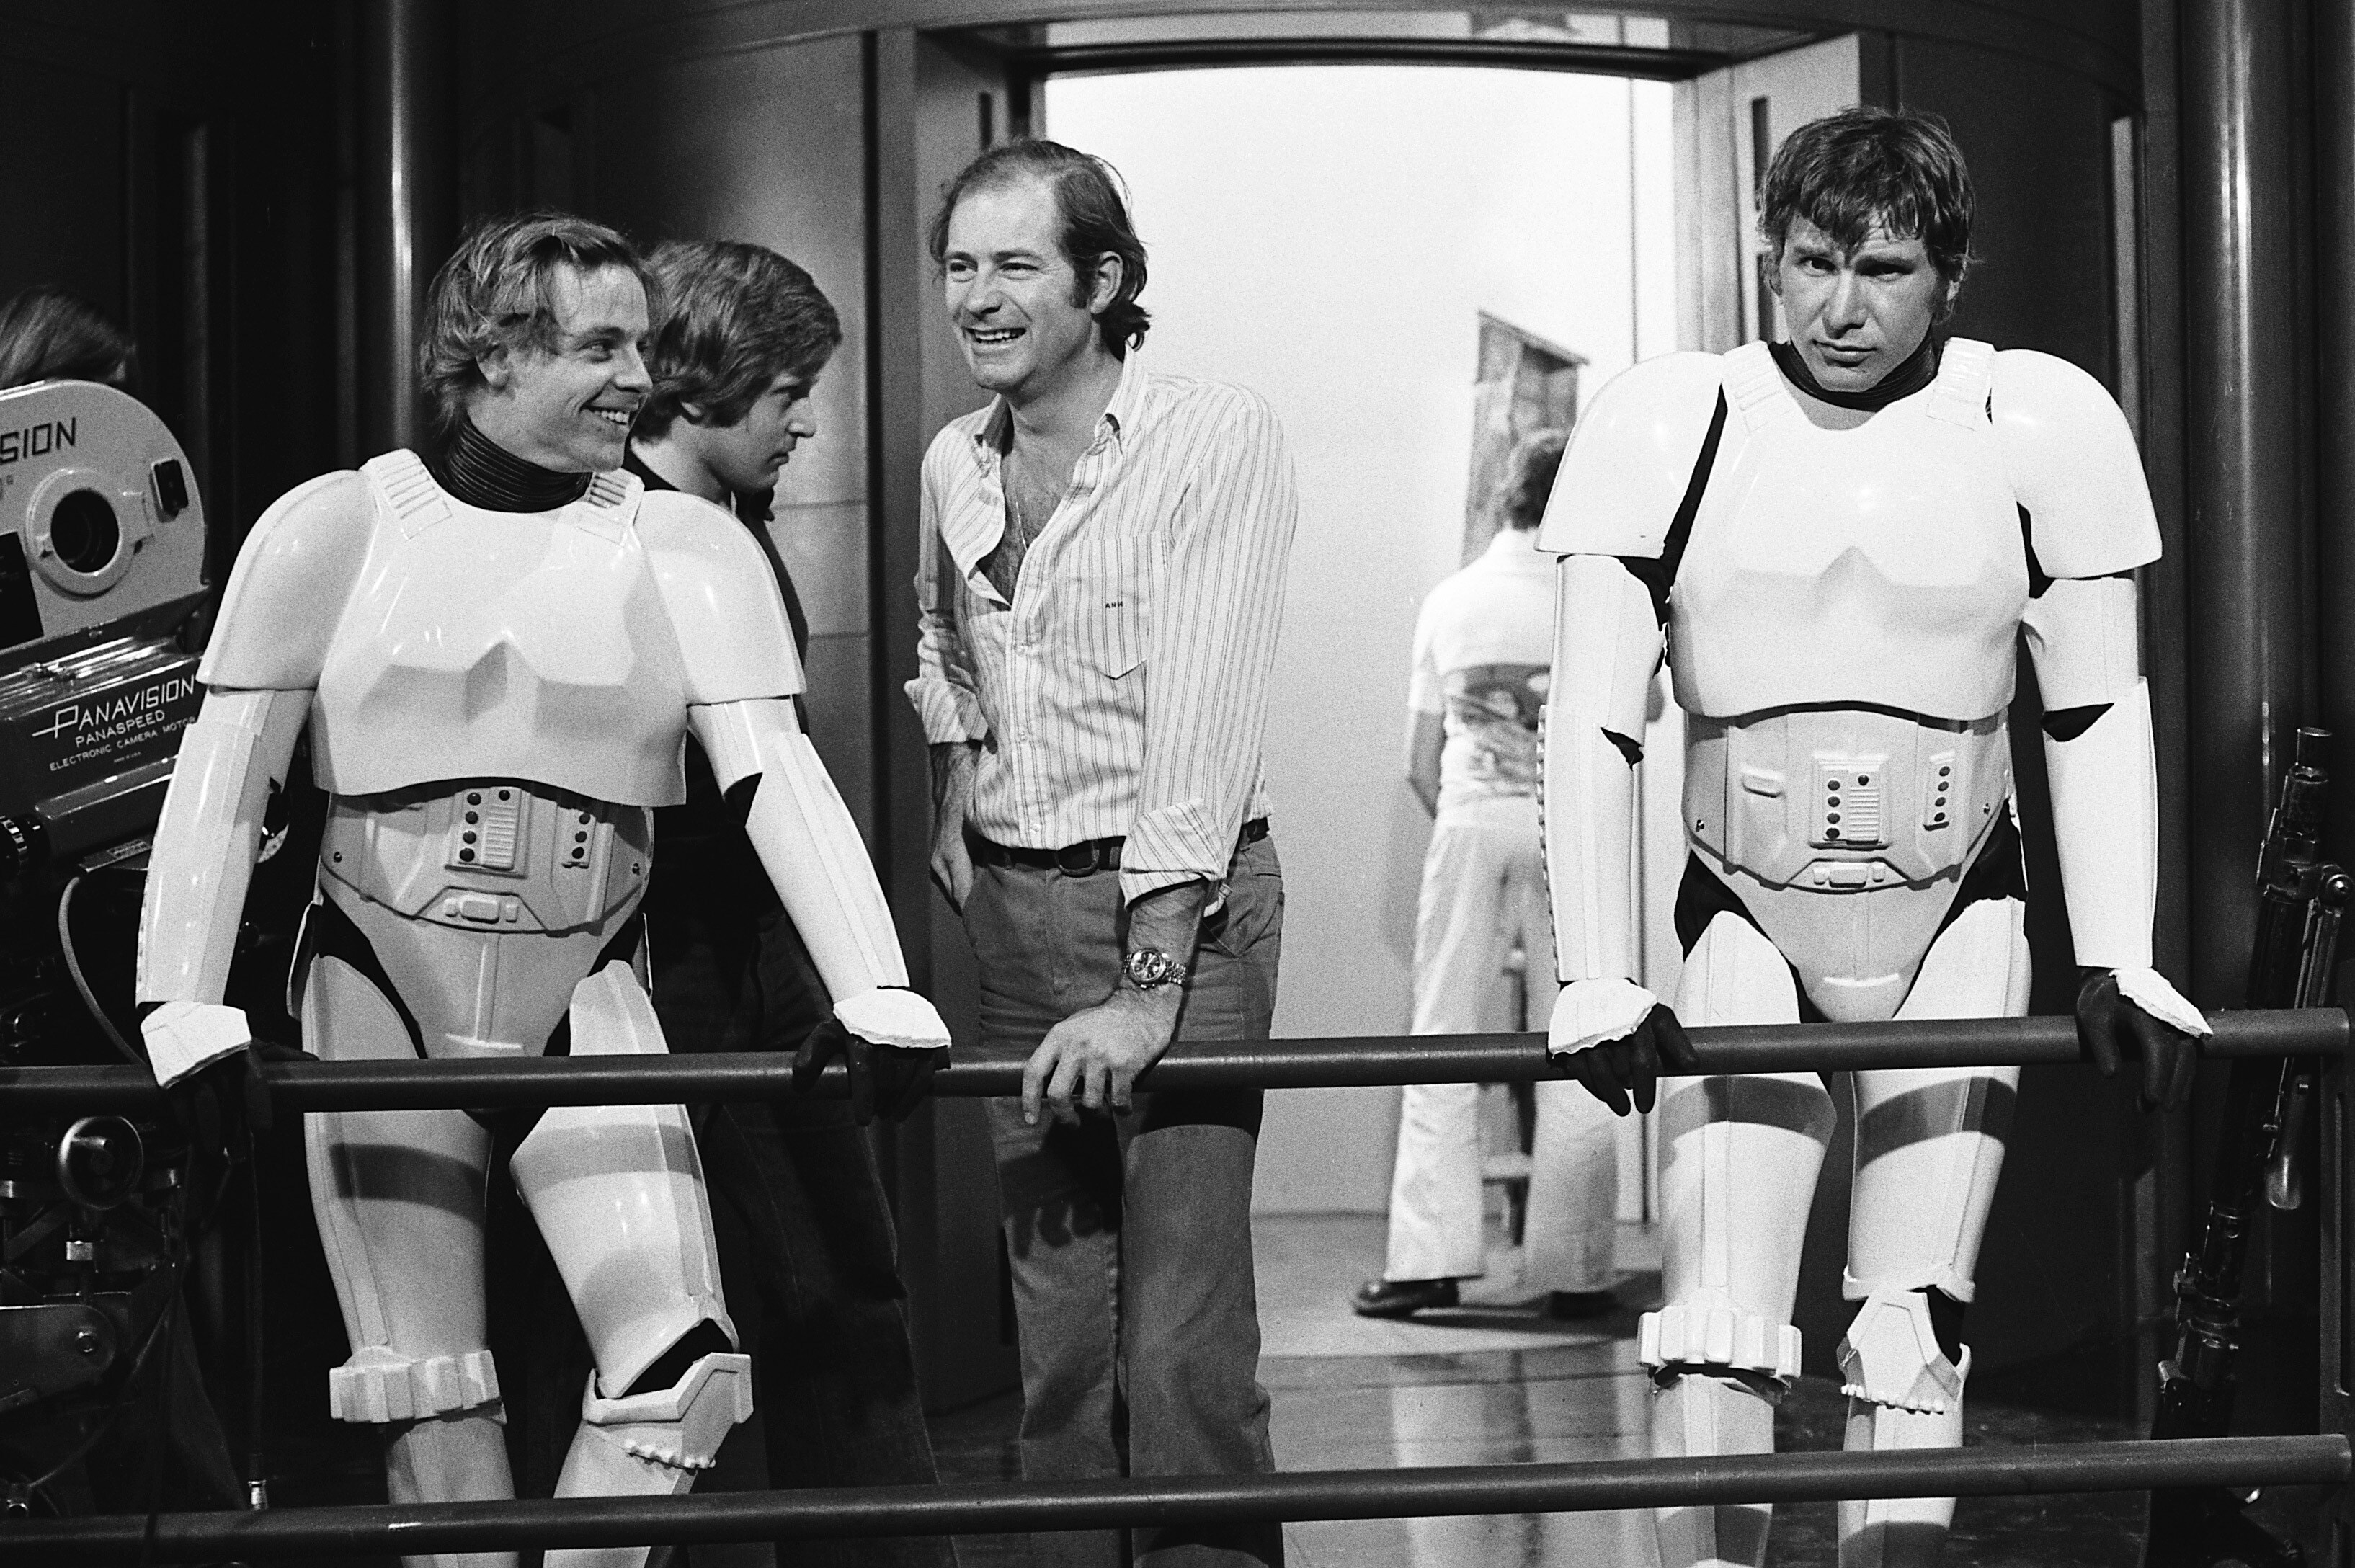 Mark Hamill and Harrison Ford, in stormtrooper gear.